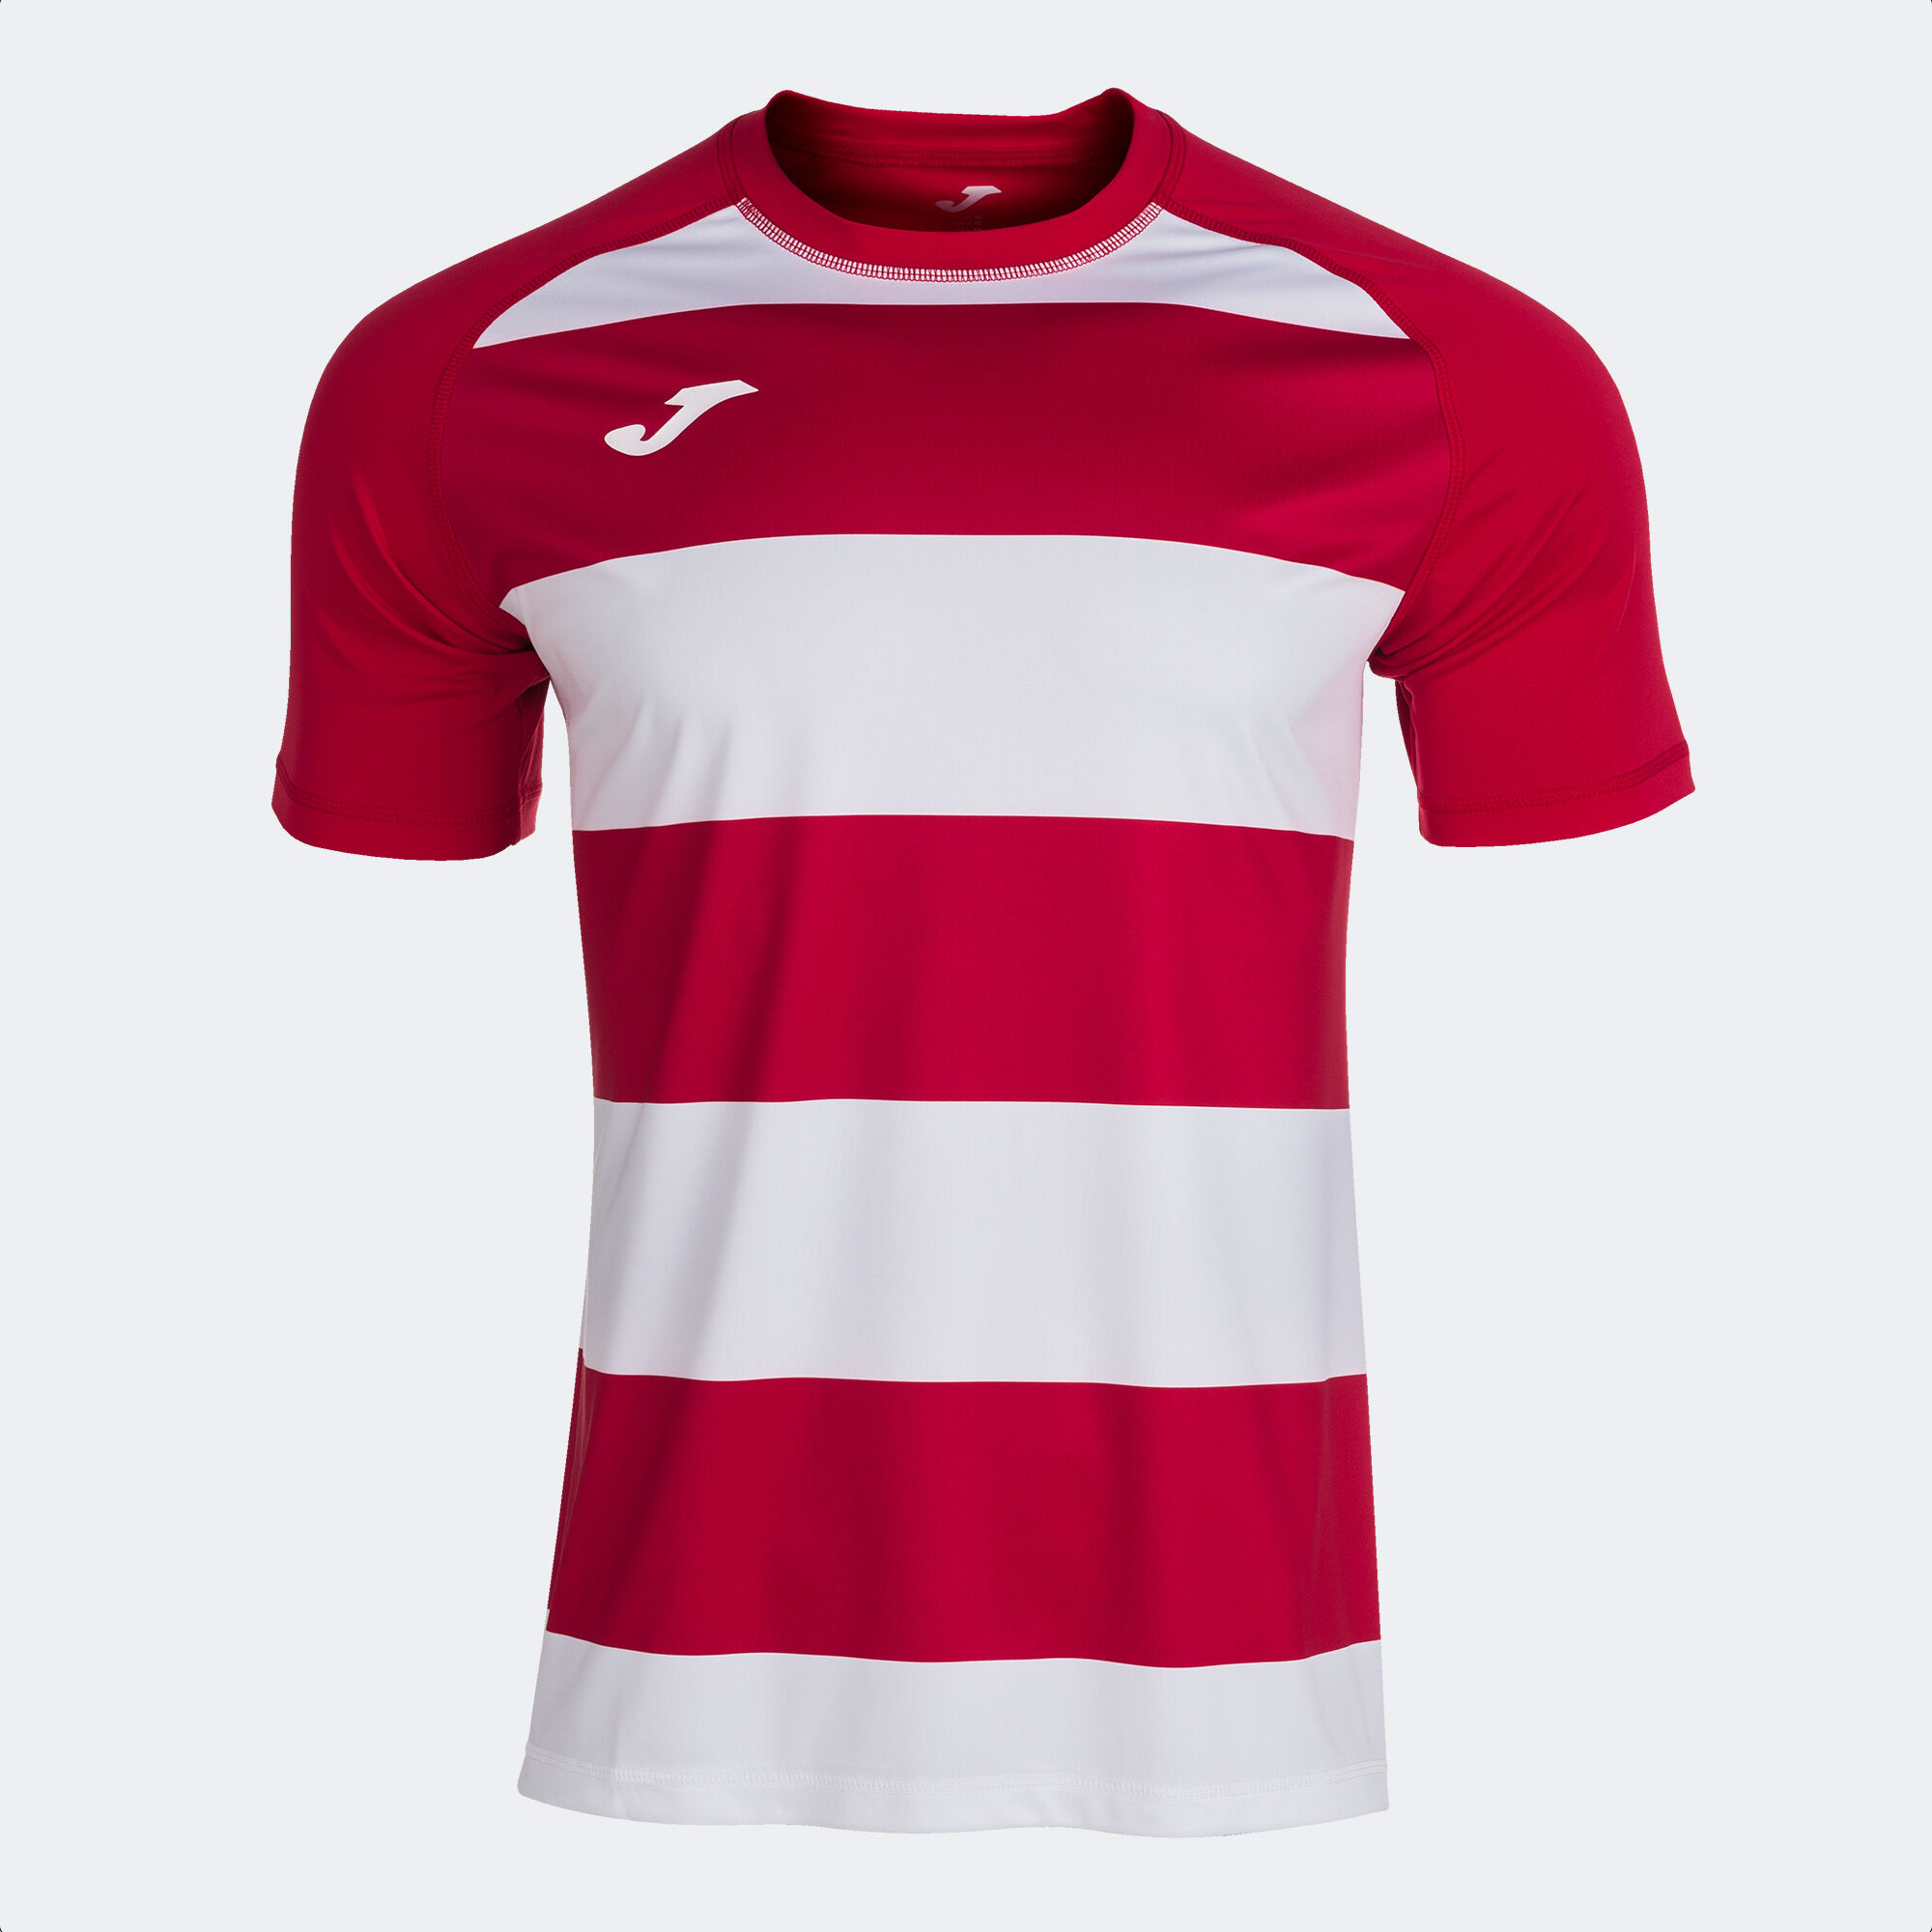 Maillot manches courtes homme Prorugby II rouge blanc